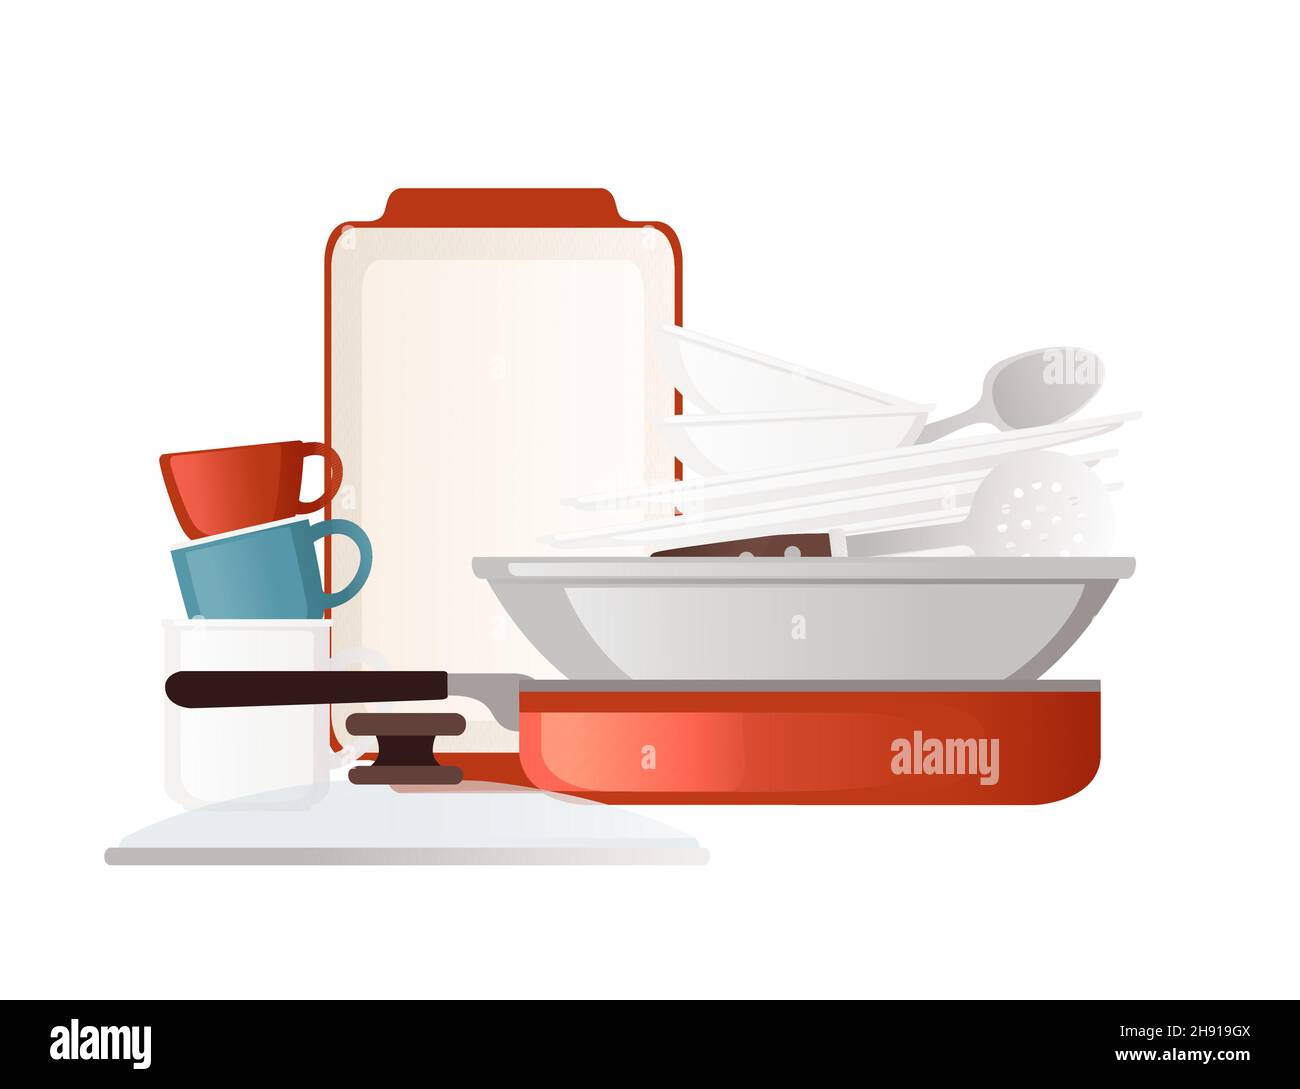 Clean stack of kitchen dishware and utensils vector illustration on white background Stock Vector